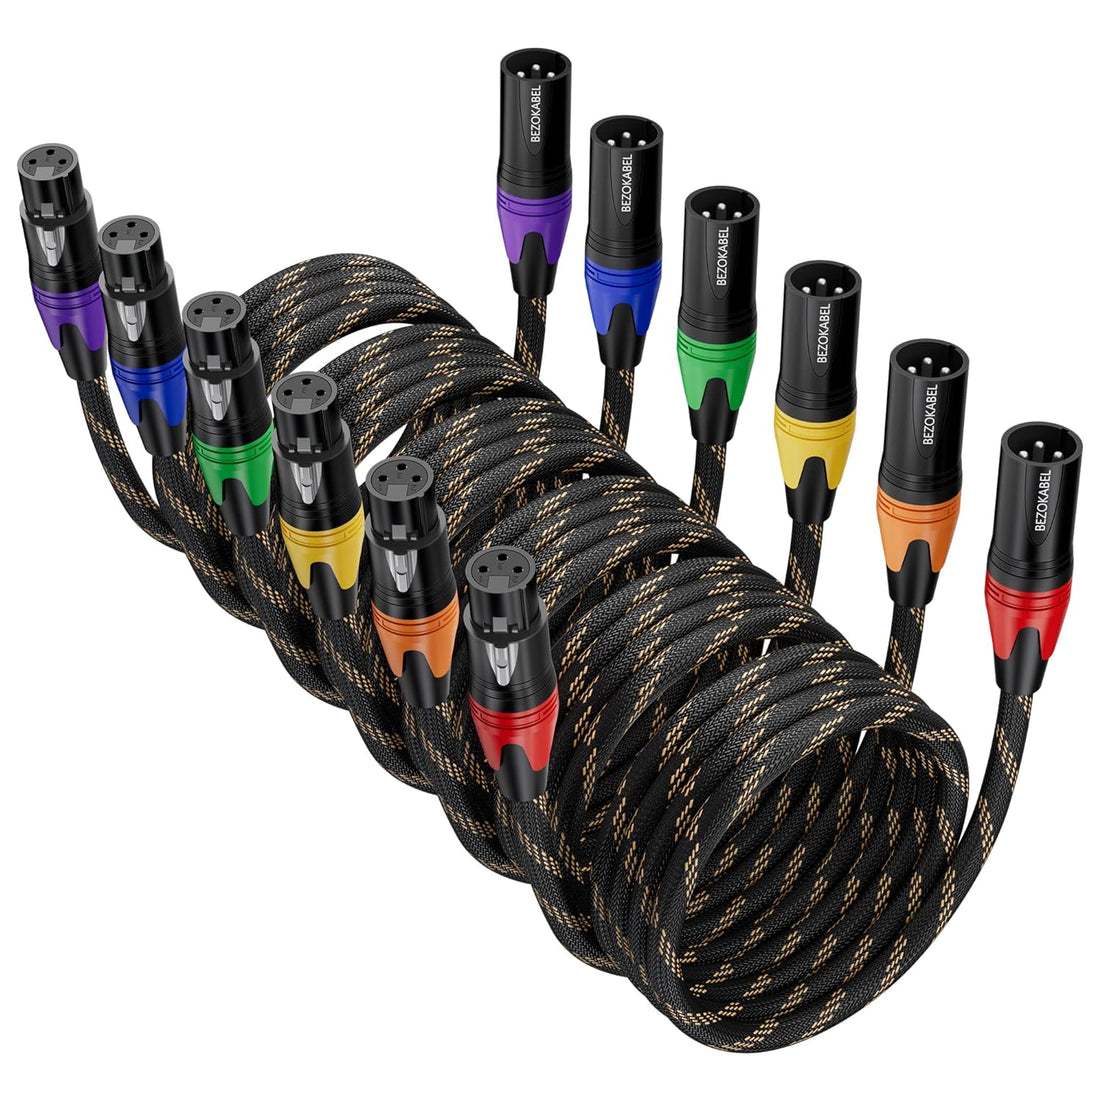 XLR Cable, Microphone Cables 25ft 6 Pack, BEZOKABLE Braided XLR Male to Female 3 Pin Colorful Connector Compatible with Microphones, Mixer, Speaker Systems and More